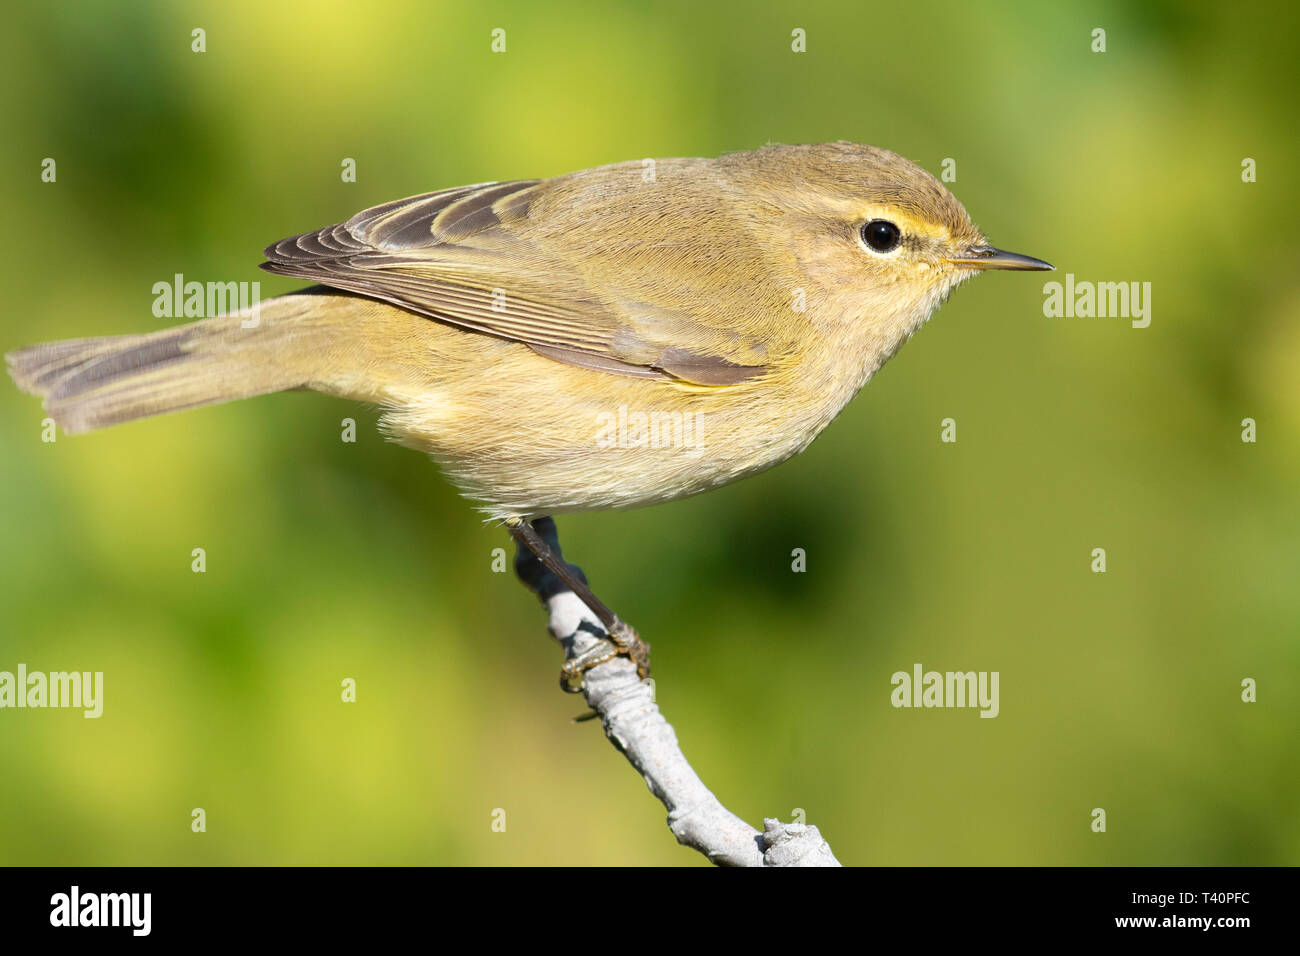 Common Chiffchaff (Phylloscopus collybita), side view of an adult perched on a branch Stock Photo